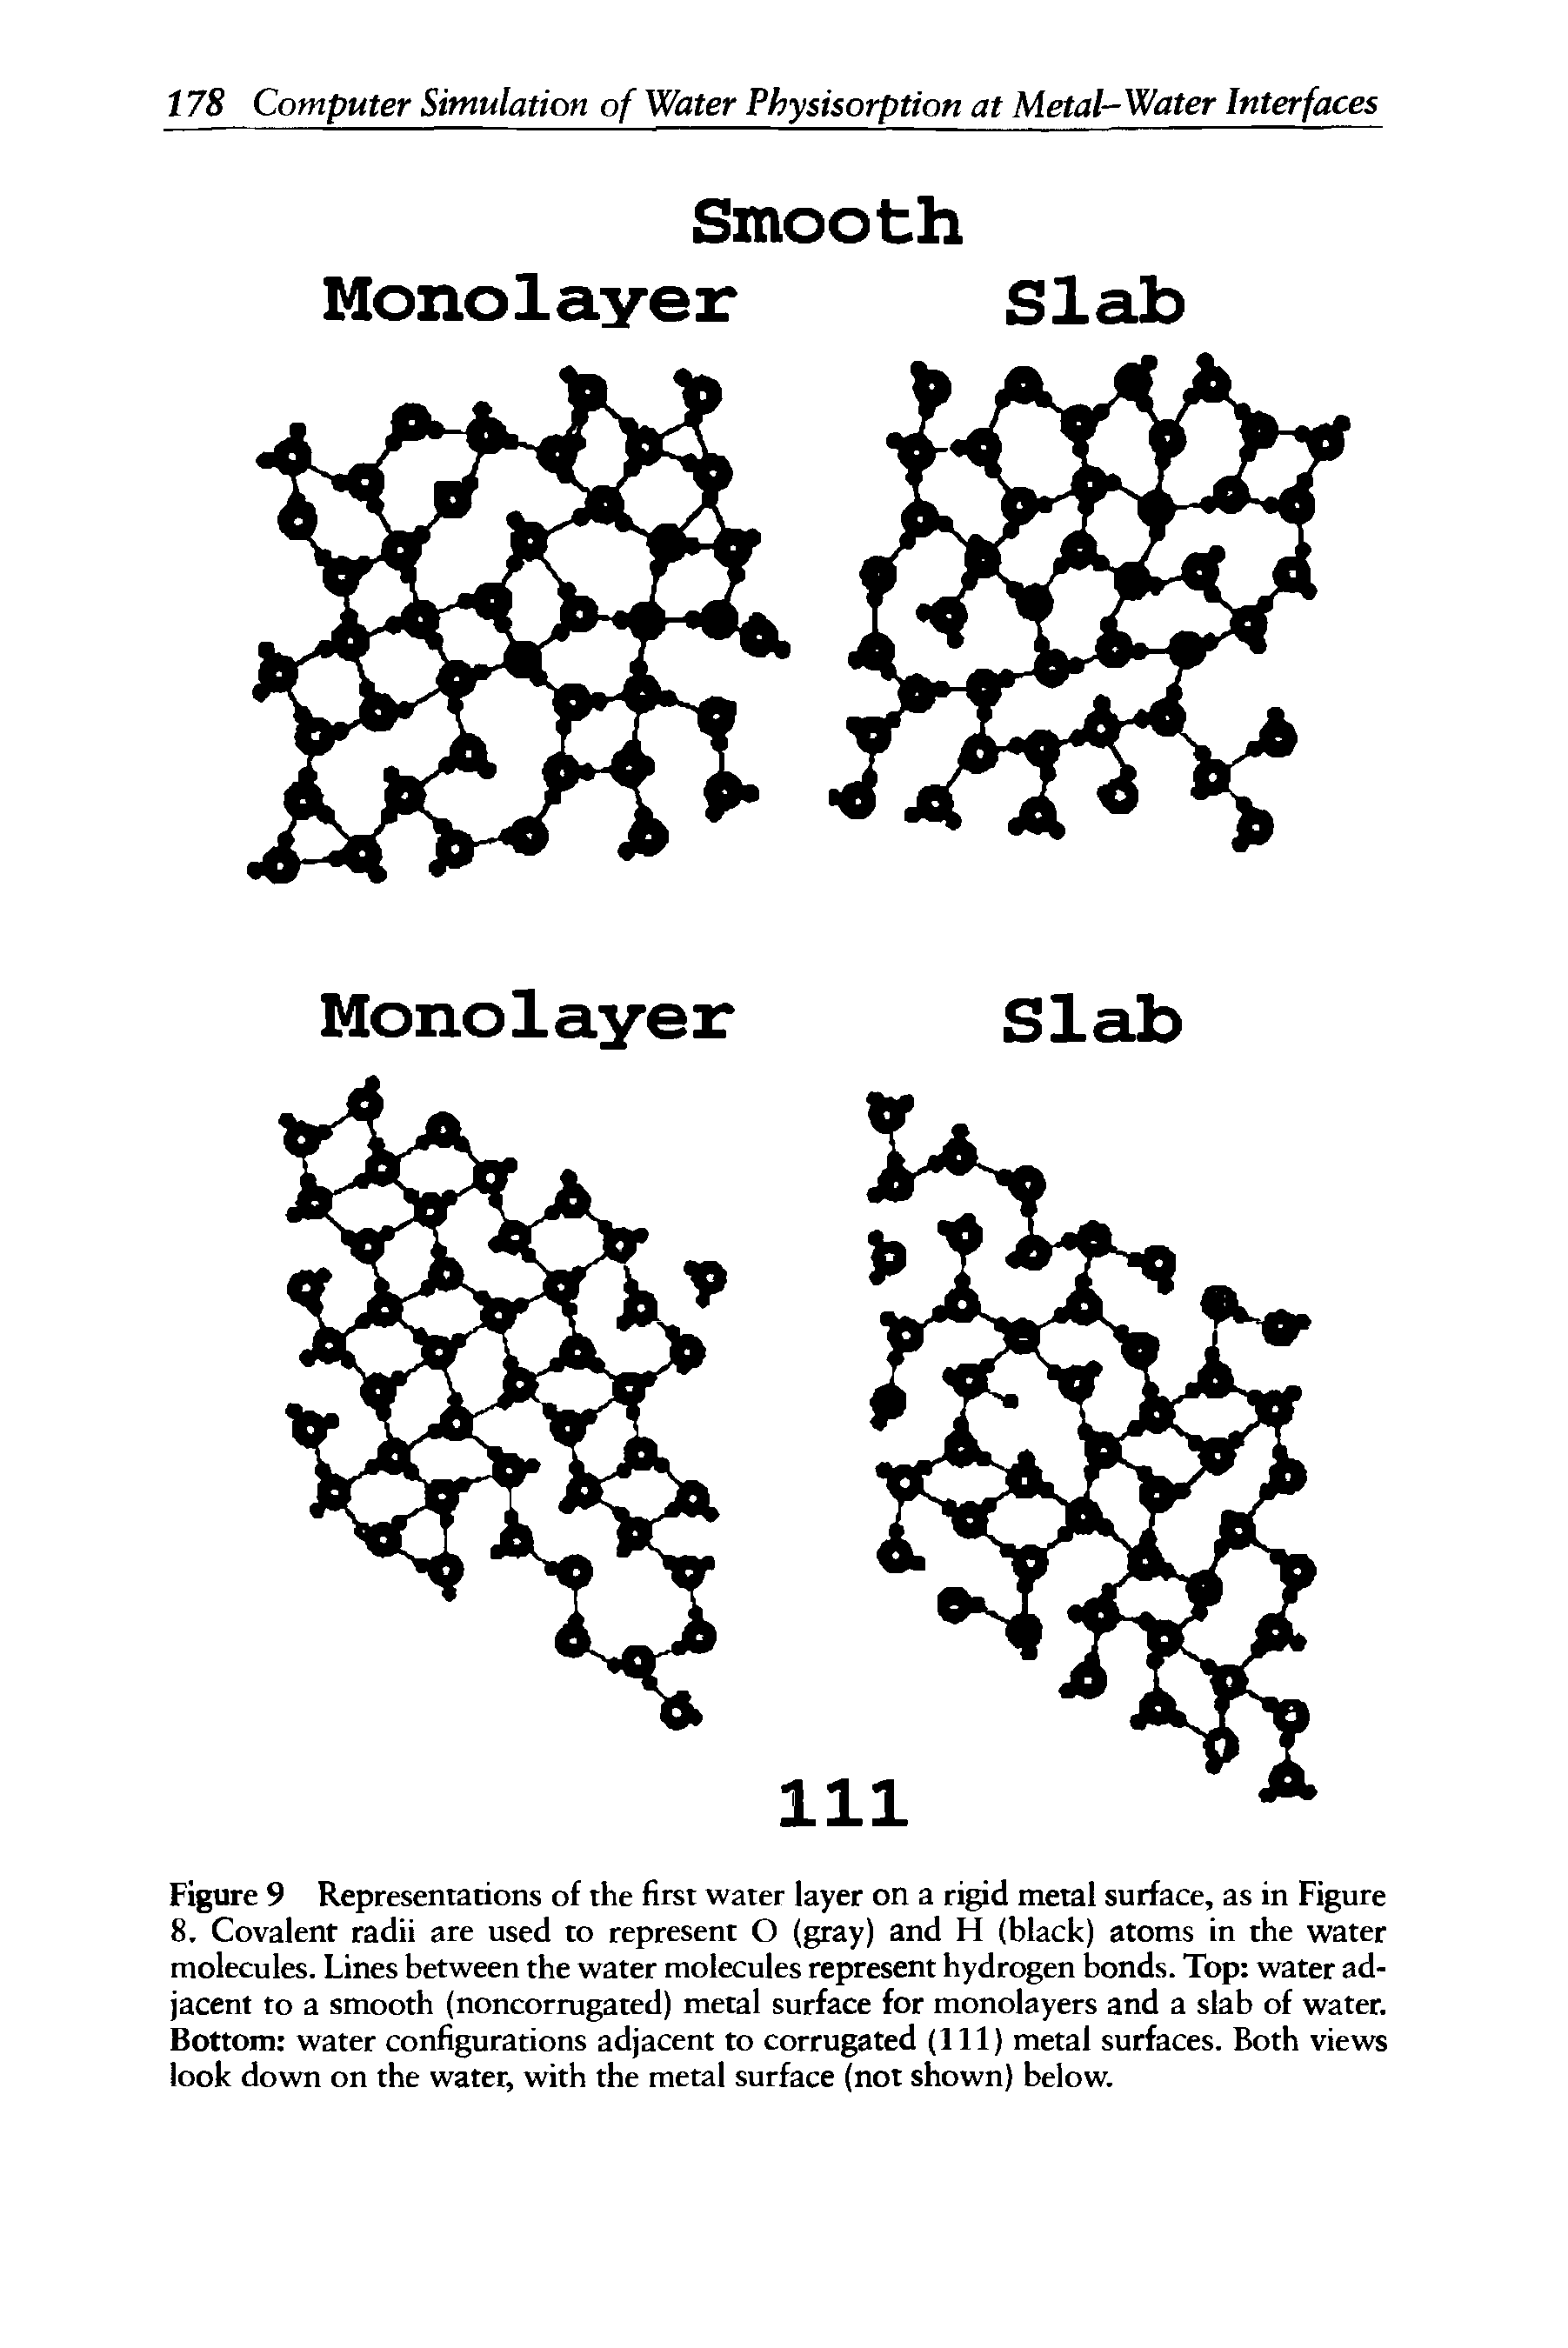 Figure 9 Representations of the first water layer on a rigid metal surface, as in Figure 8. Covalent radii are used to represent O (gray) and H (black) atoms in the water molecules. Lines between the water molecules represent hydrogen bonds. Top water adjacent to a smooth (noncorrugated) metal surface for monolayers and a slab of water. Bottom water configurations adjacent to corrugated (111) metal surfaces. Both views look down on the water, with the metal surface (not shown) below.